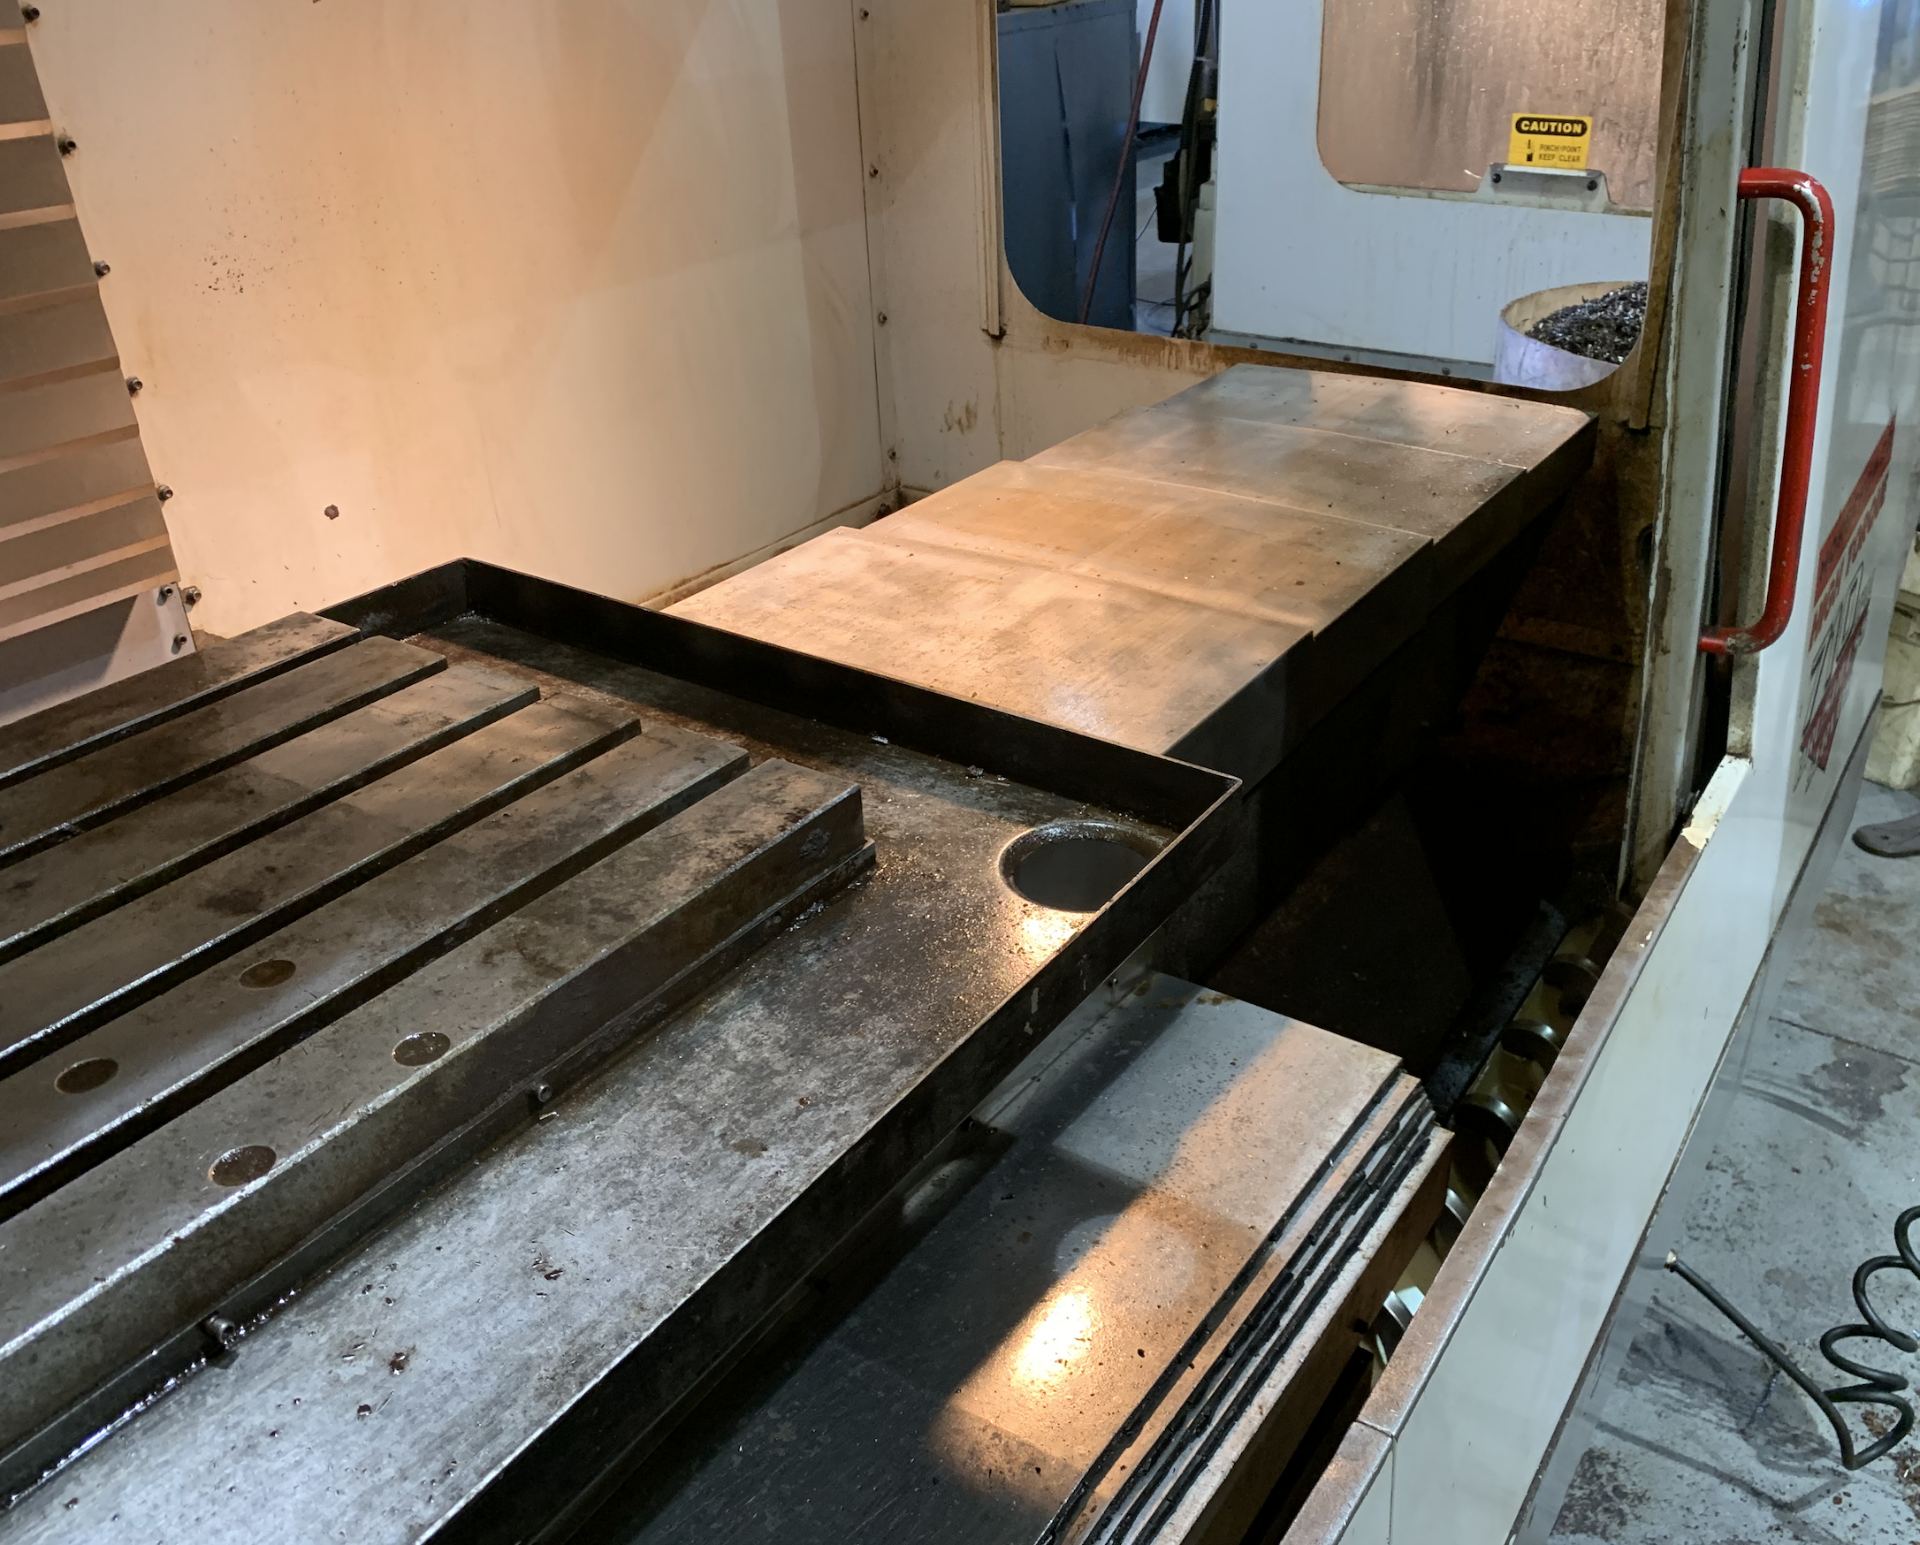 1997 HAAS VF-3 CNC MILL, HAAS CNC CTRL, 32 POSITION TOOL CHANGER, 18" X 48"TABLE - Image 2 of 5